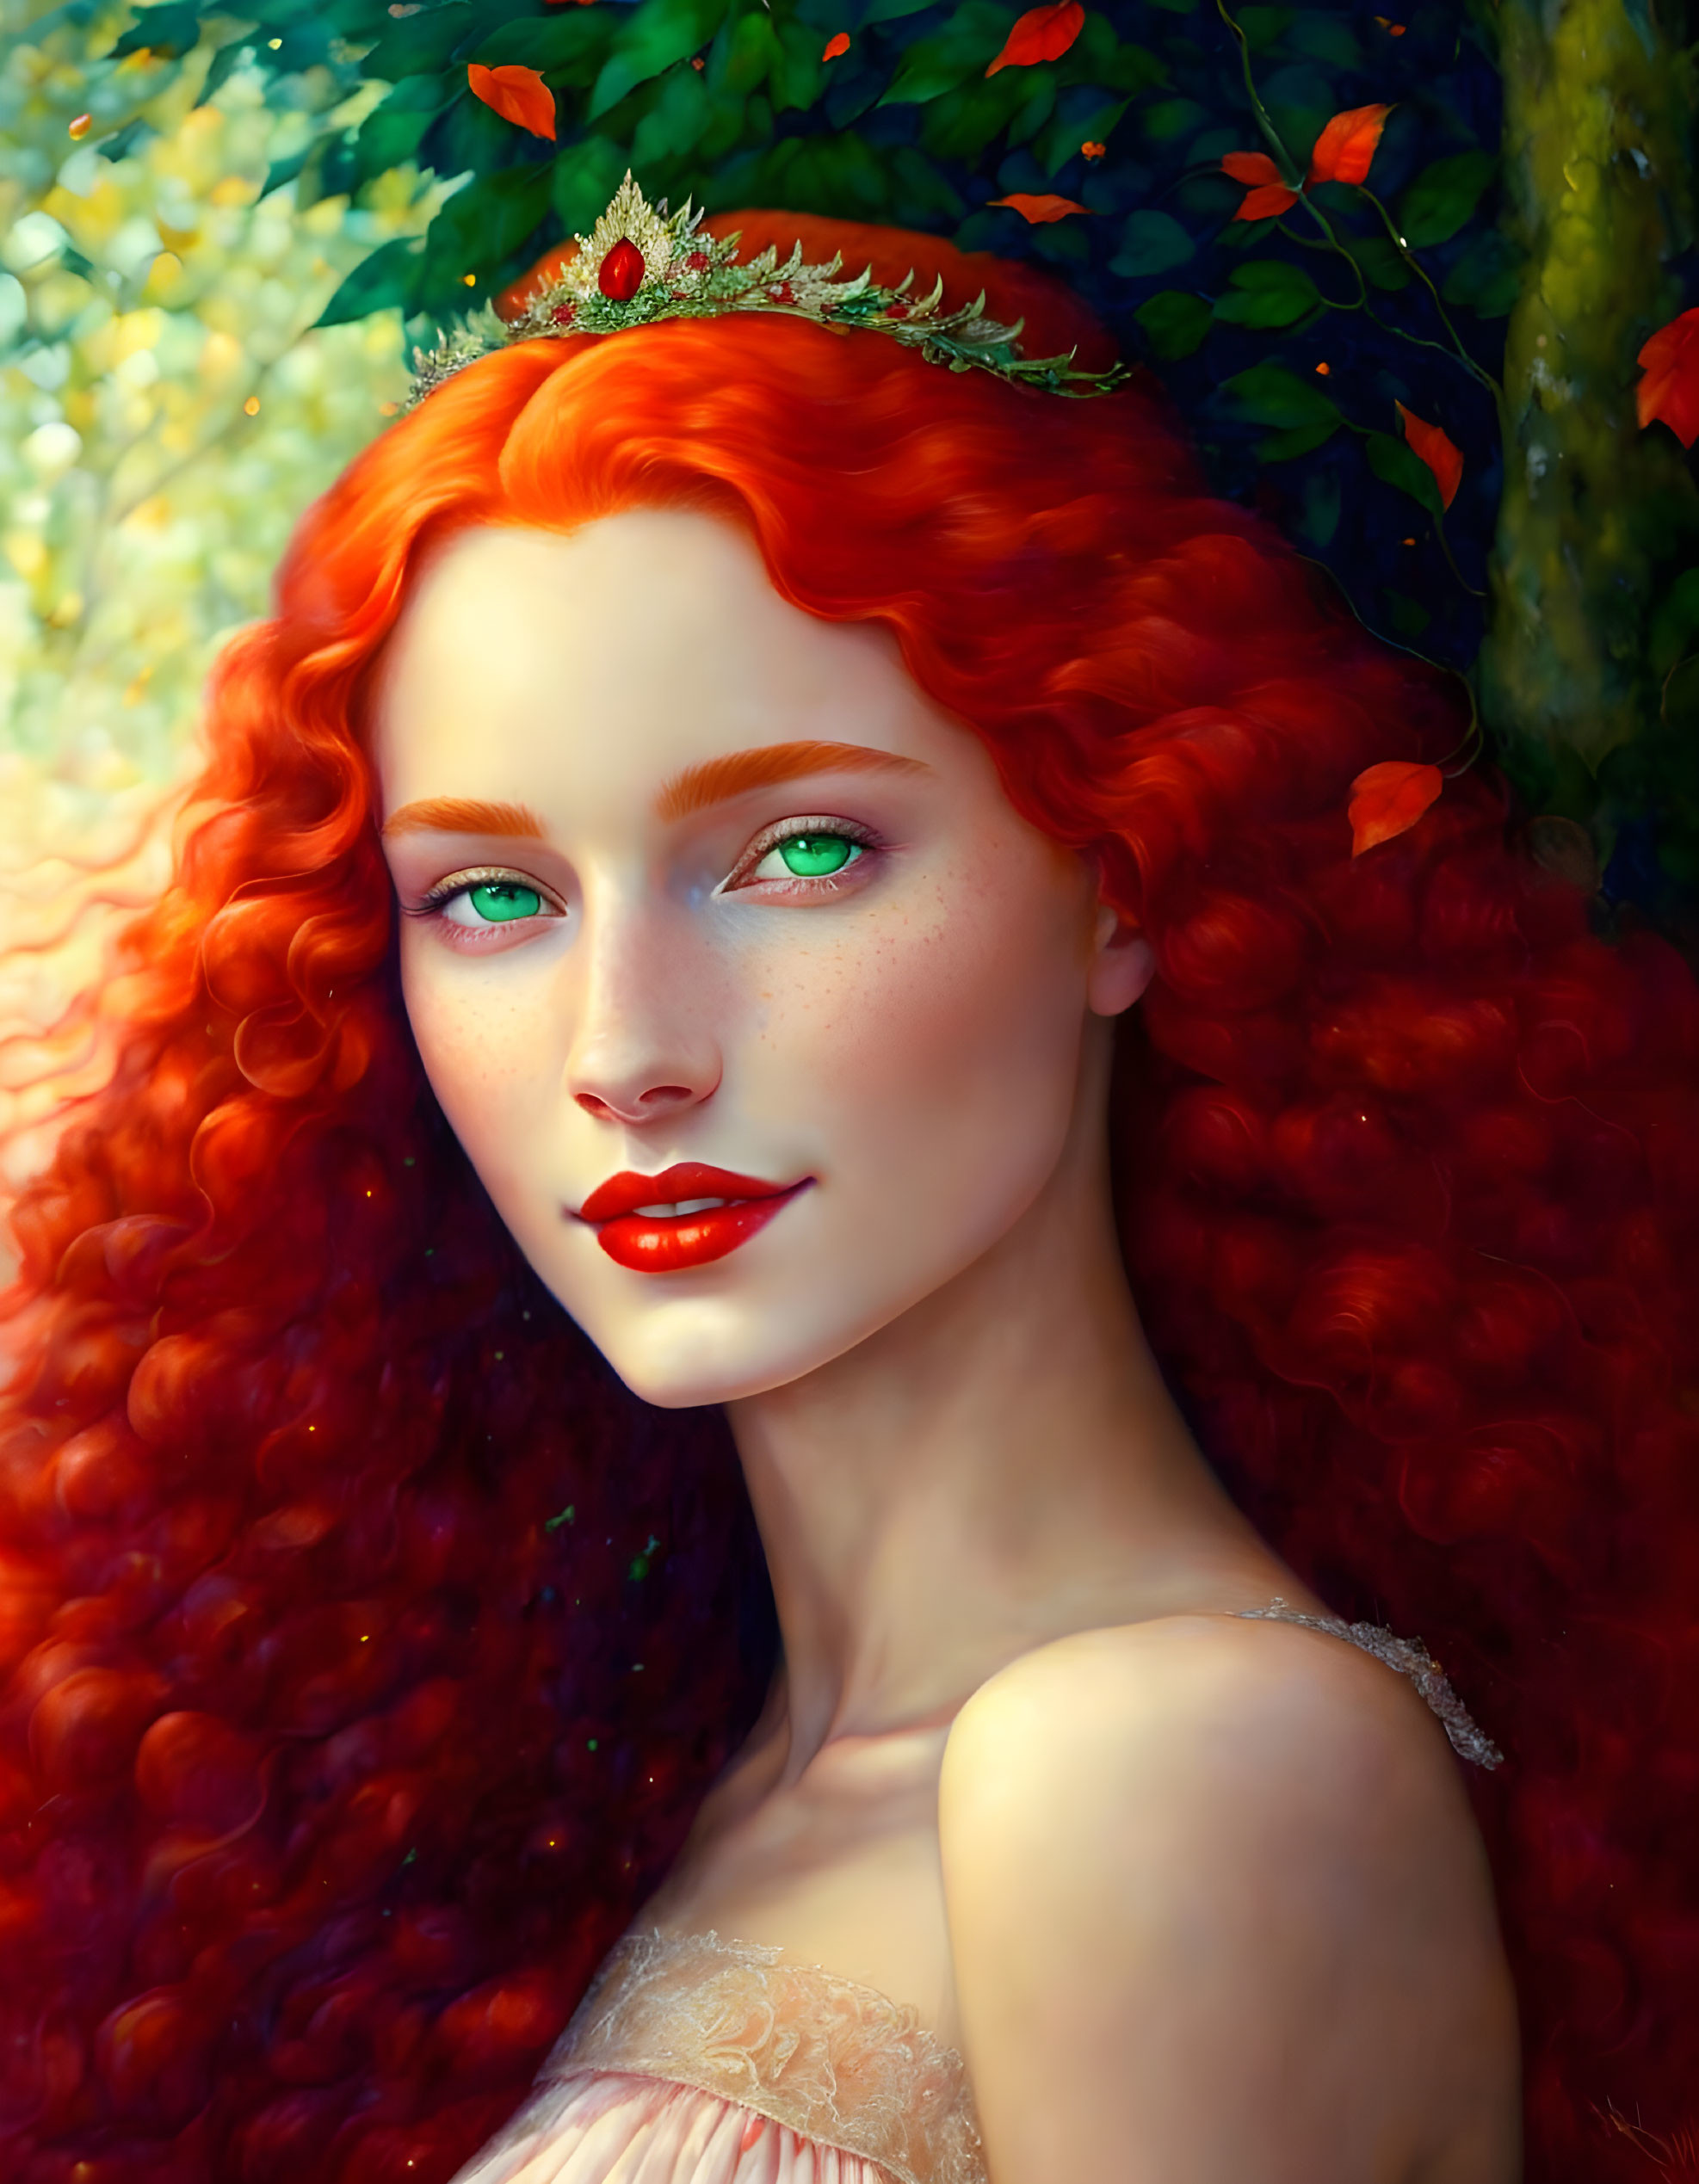 Beautiful woman with fire-red hair